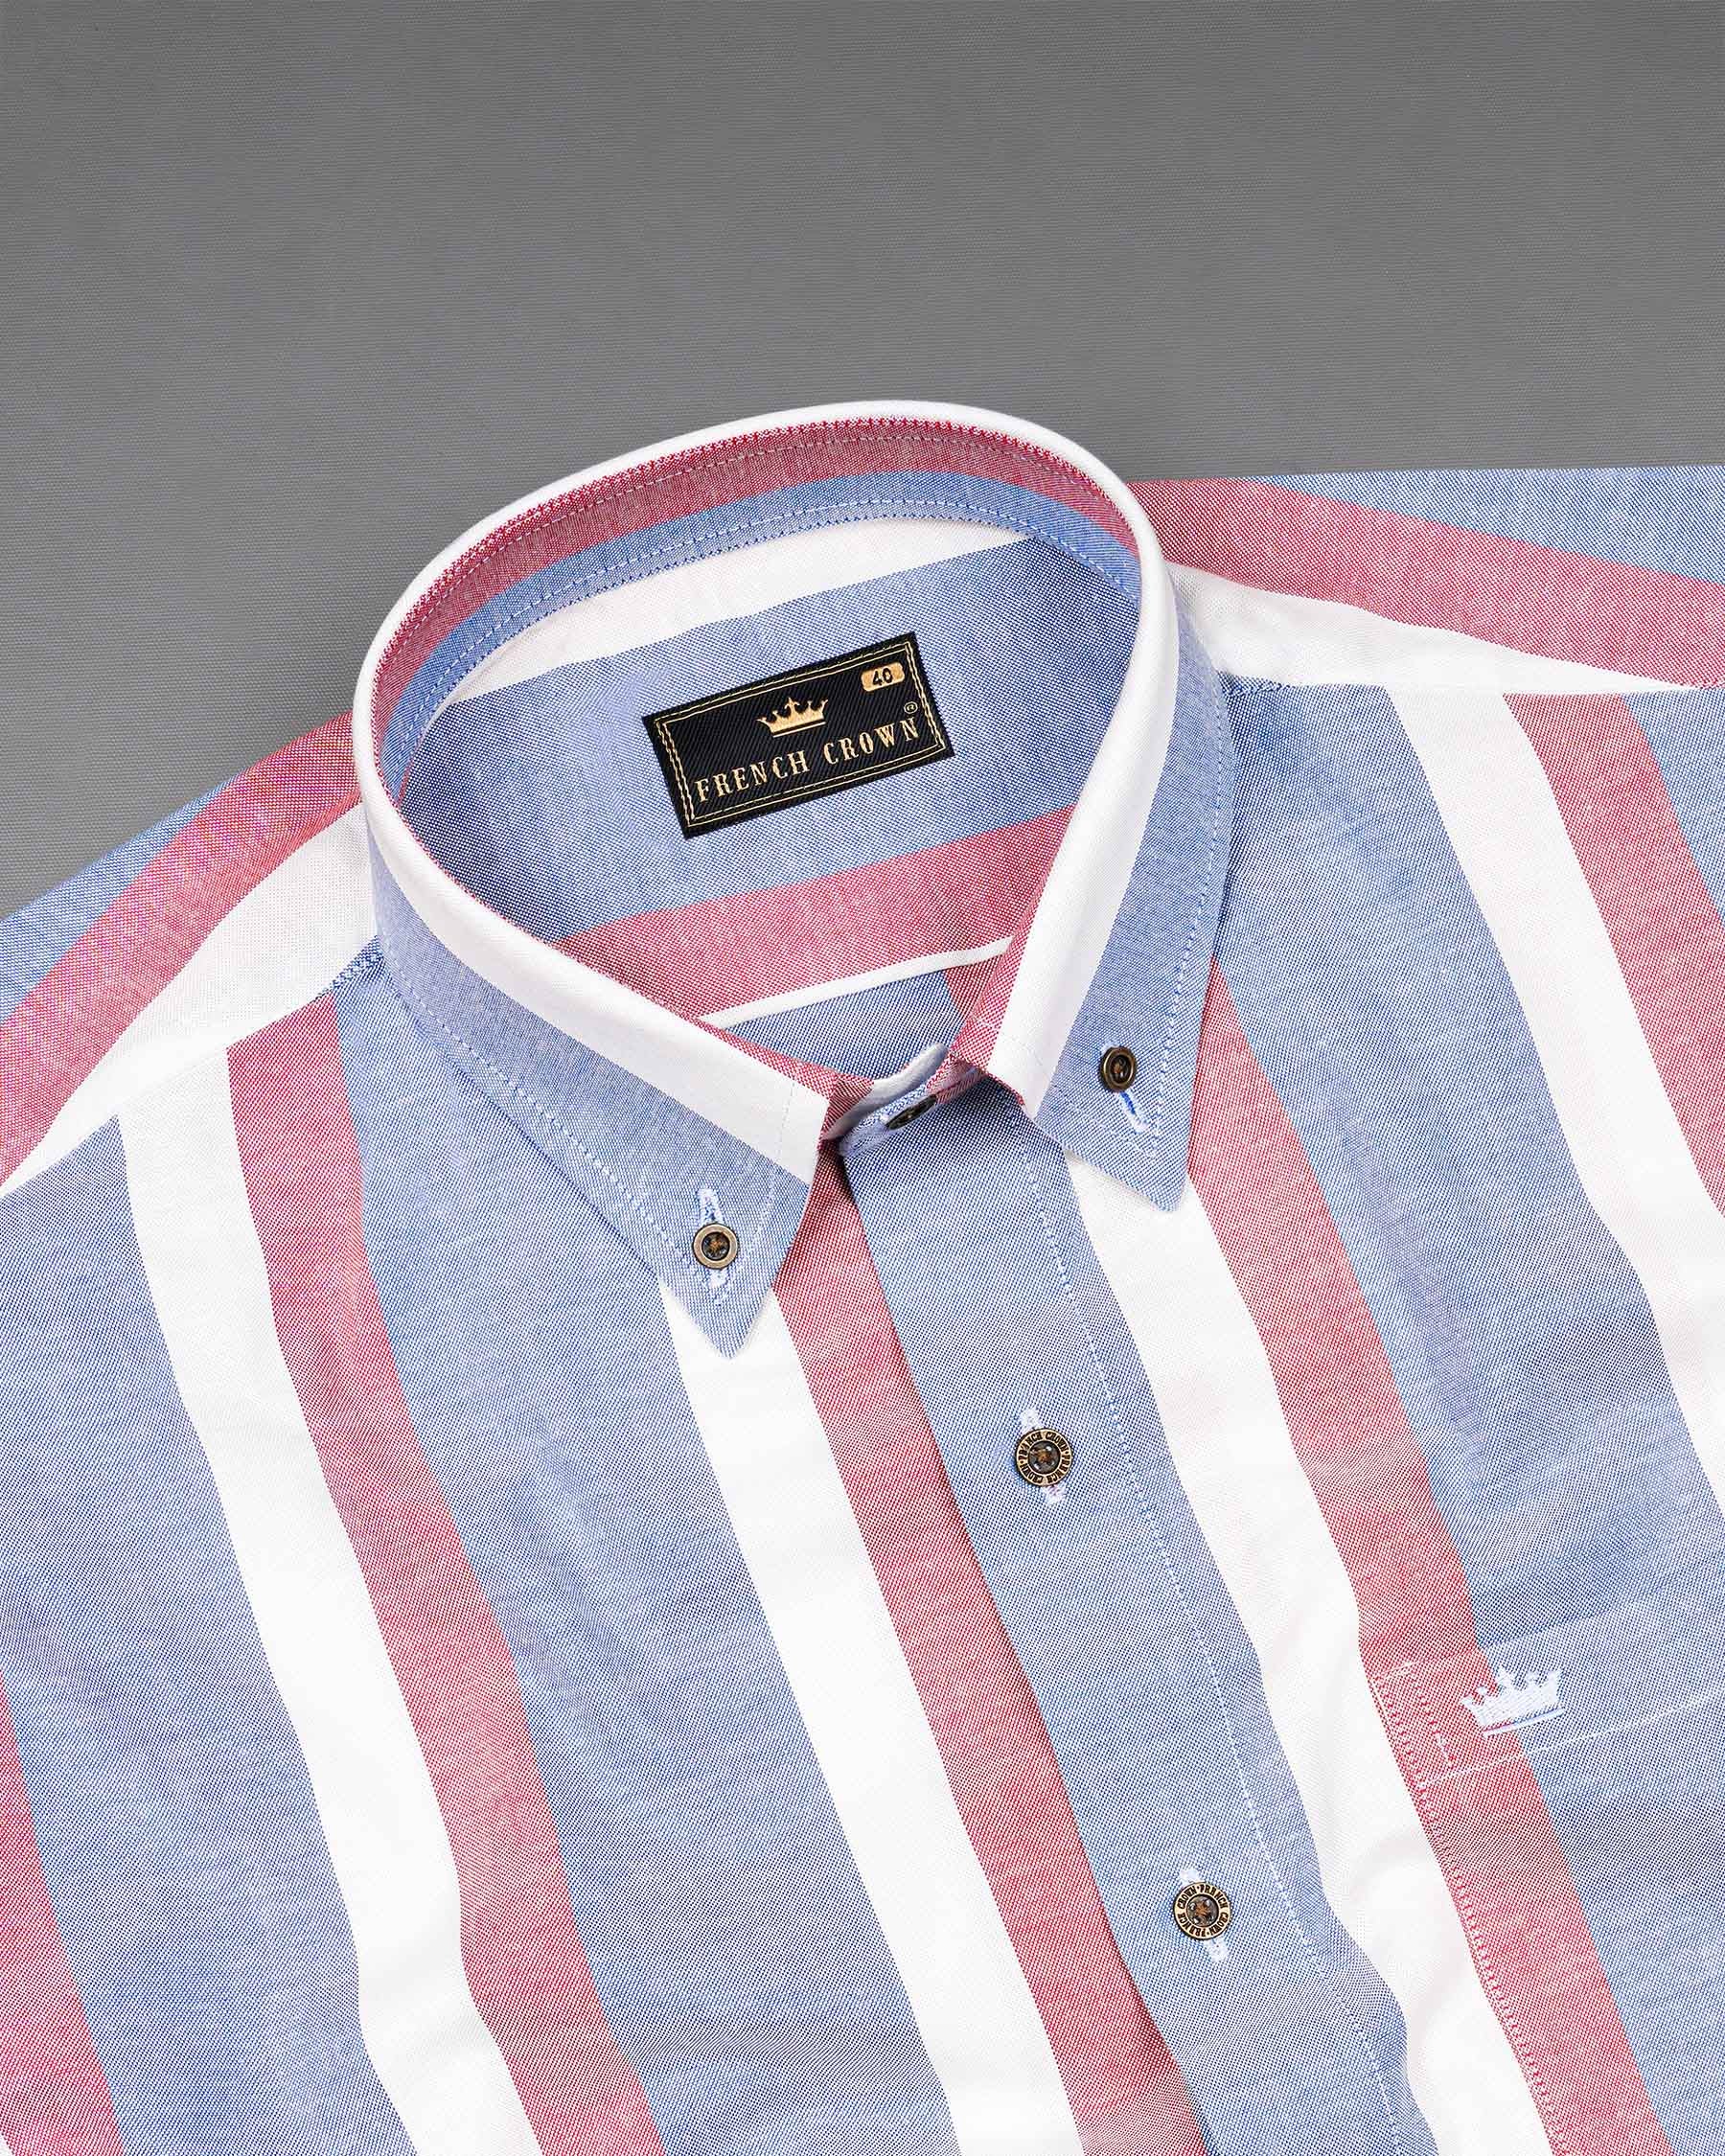 Wistful Blue and Charm Pink Striped Royal Oxford Shirt 7389-BD-MB-38,7389-BD-MB-38,7389-BD-MB-39,7389-BD-MB-39,7389-BD-MB-40,7389-BD-MB-40,7389-BD-MB-42,7389-BD-MB-42,7389-BD-MB-44,7389-BD-MB-44,7389-BD-MB-46,7389-BD-MB-46,7389-BD-MB-48,7389-BD-MB-48,7389-BD-MB-50,7389-BD-MB-50,7389-BD-MB-52,7389-BD-MB-52